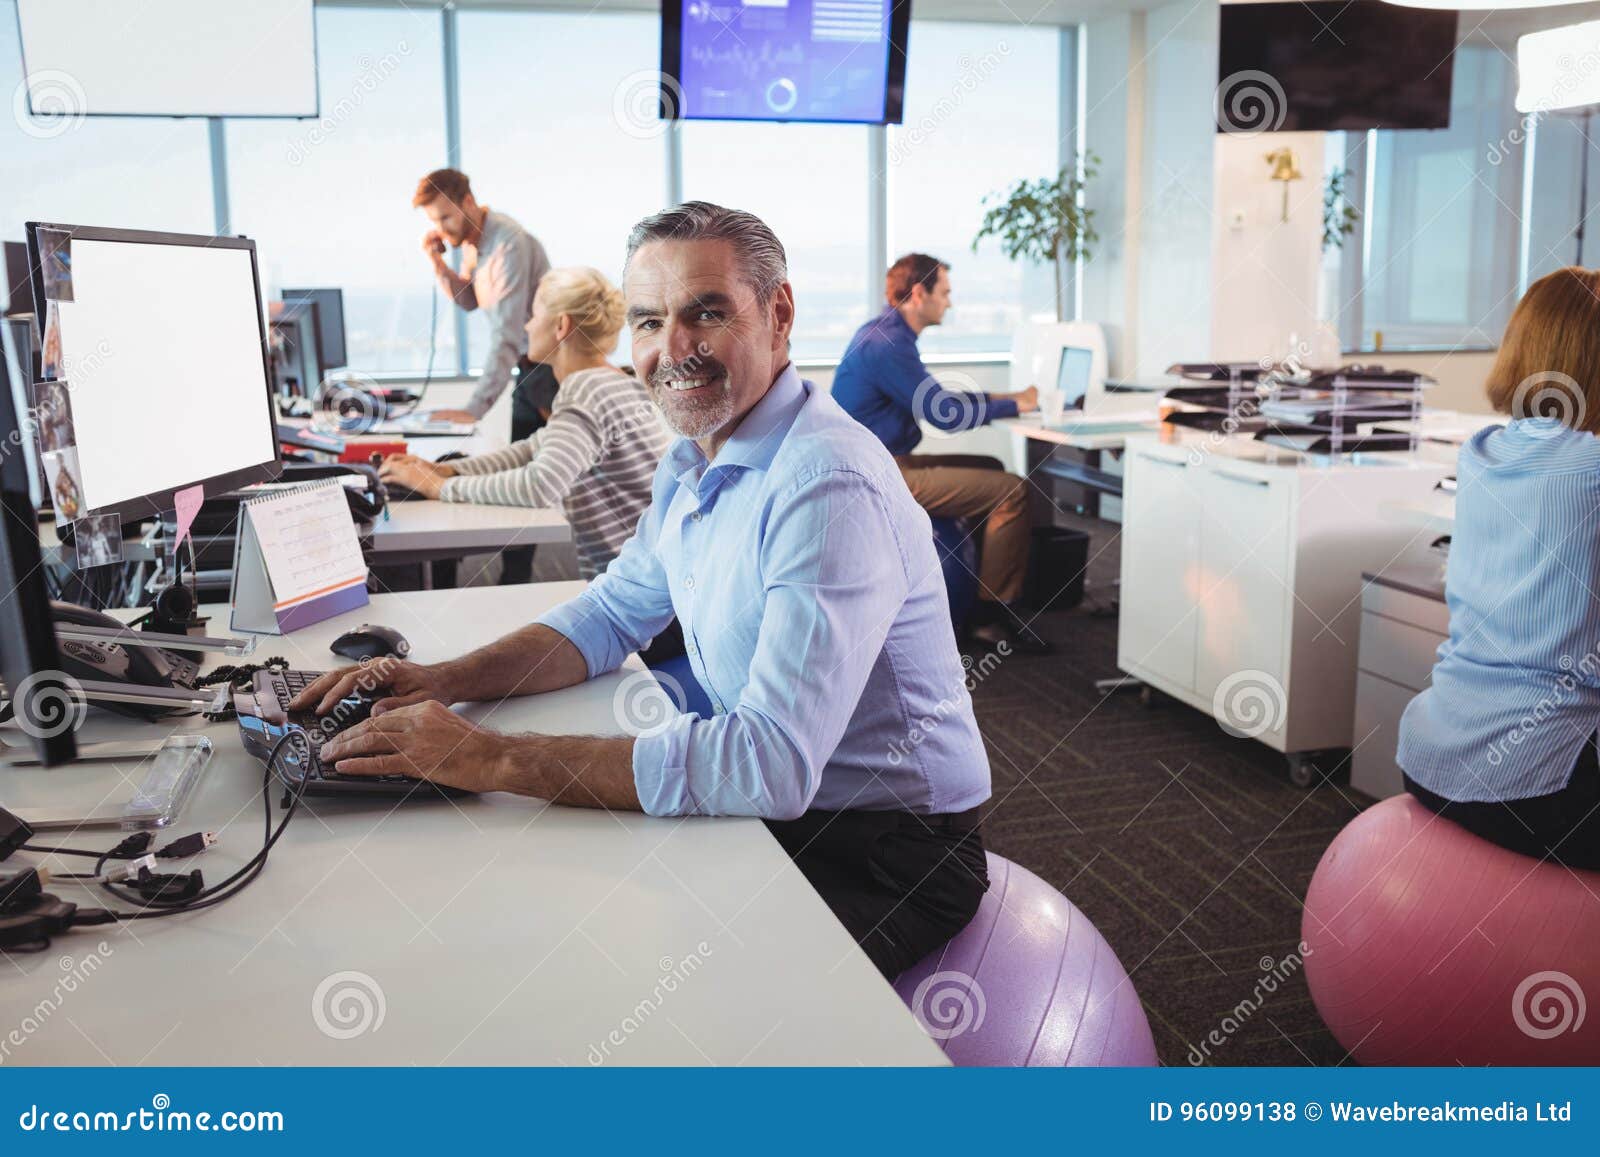 Portrait Of Smiling Businessman Working At Desk While Sitting On